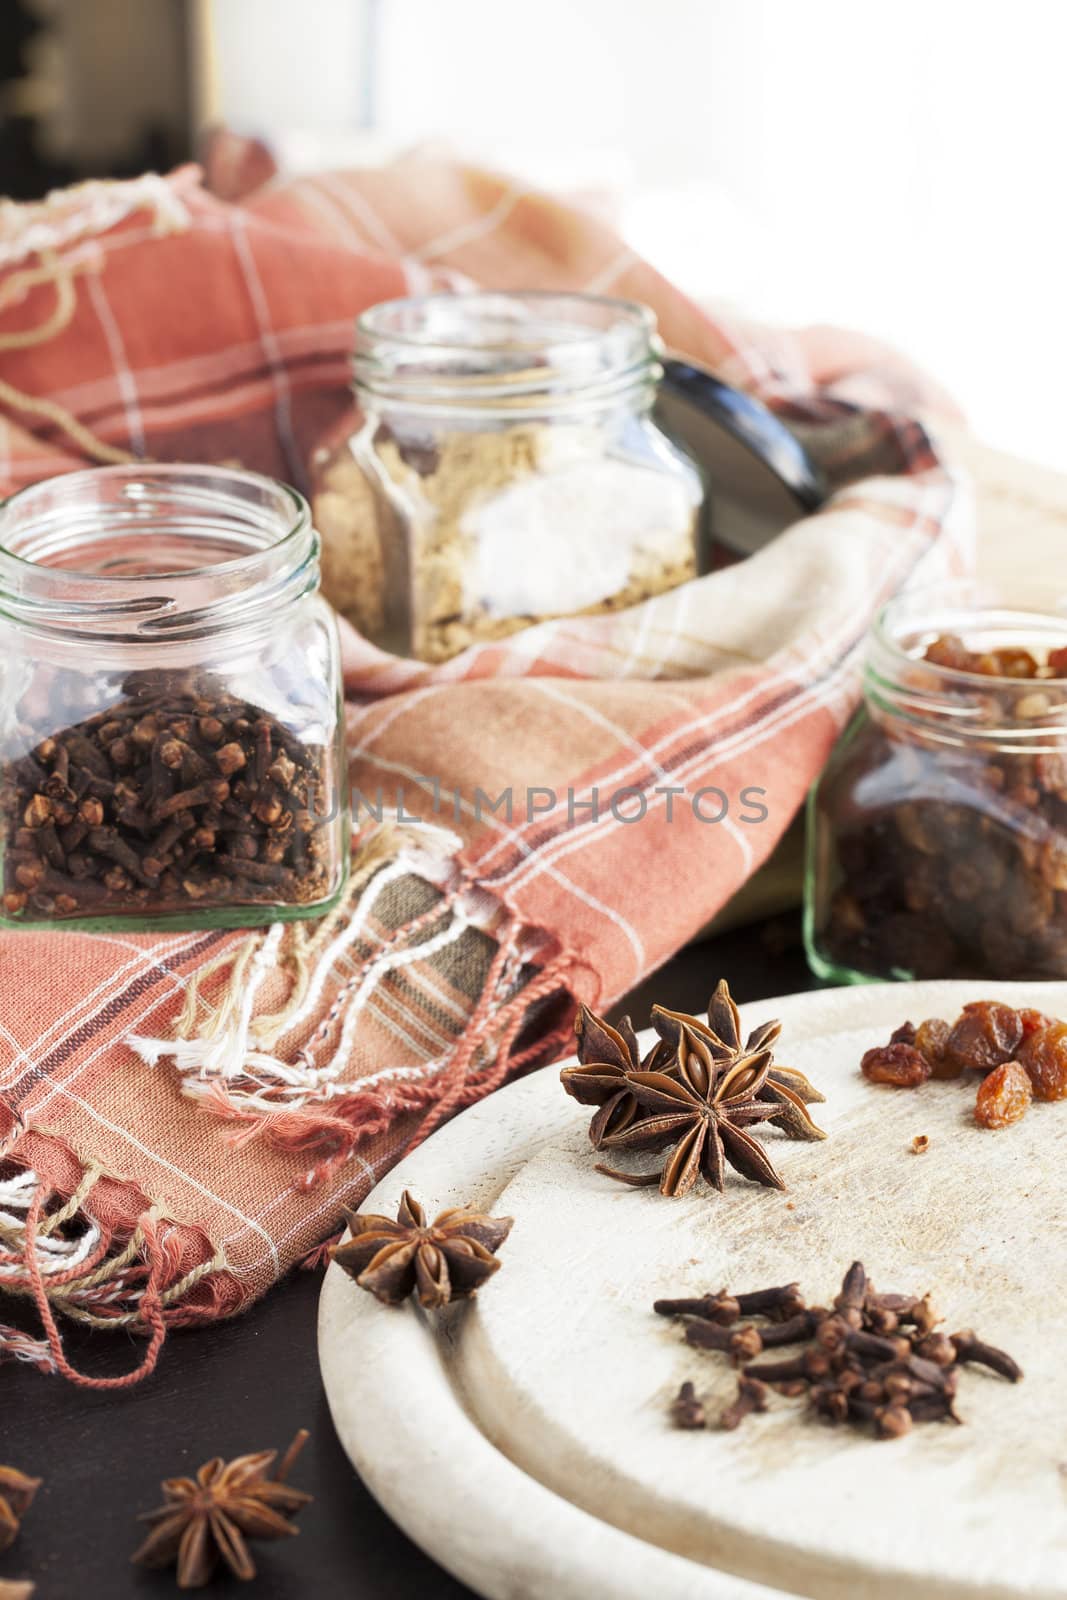 Star anise and cloves with other ingredients